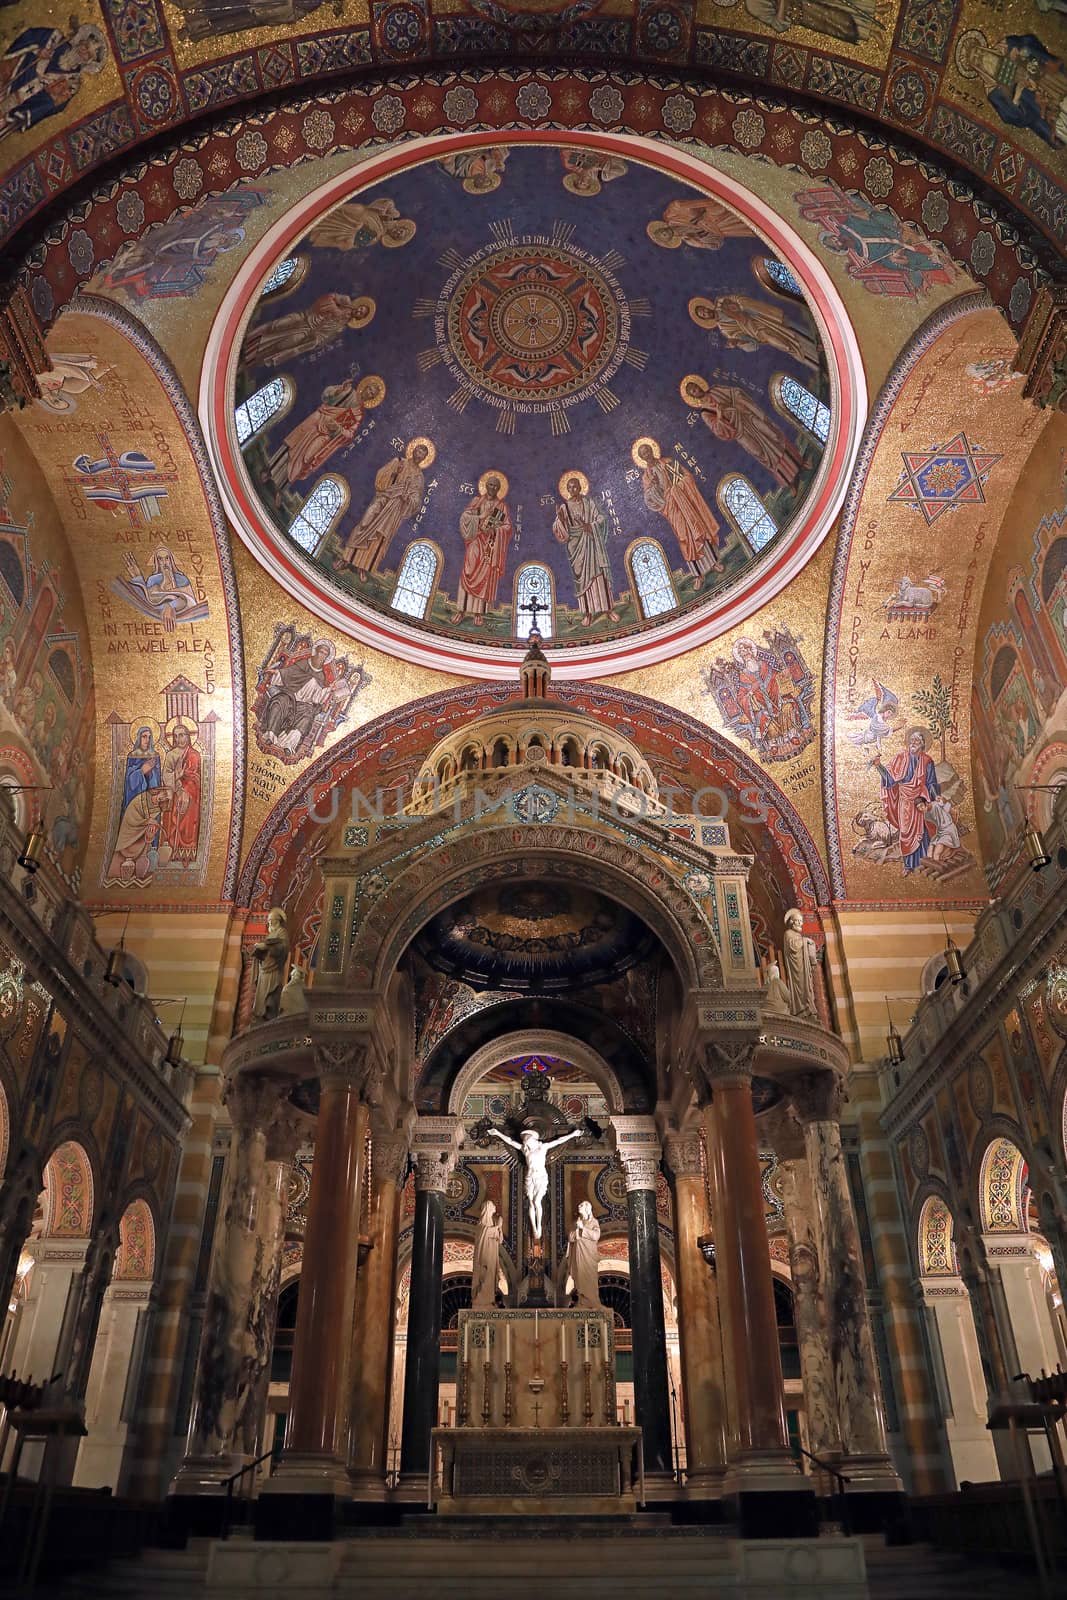 Cathedral Basilica of Saint Louis by jbyard22